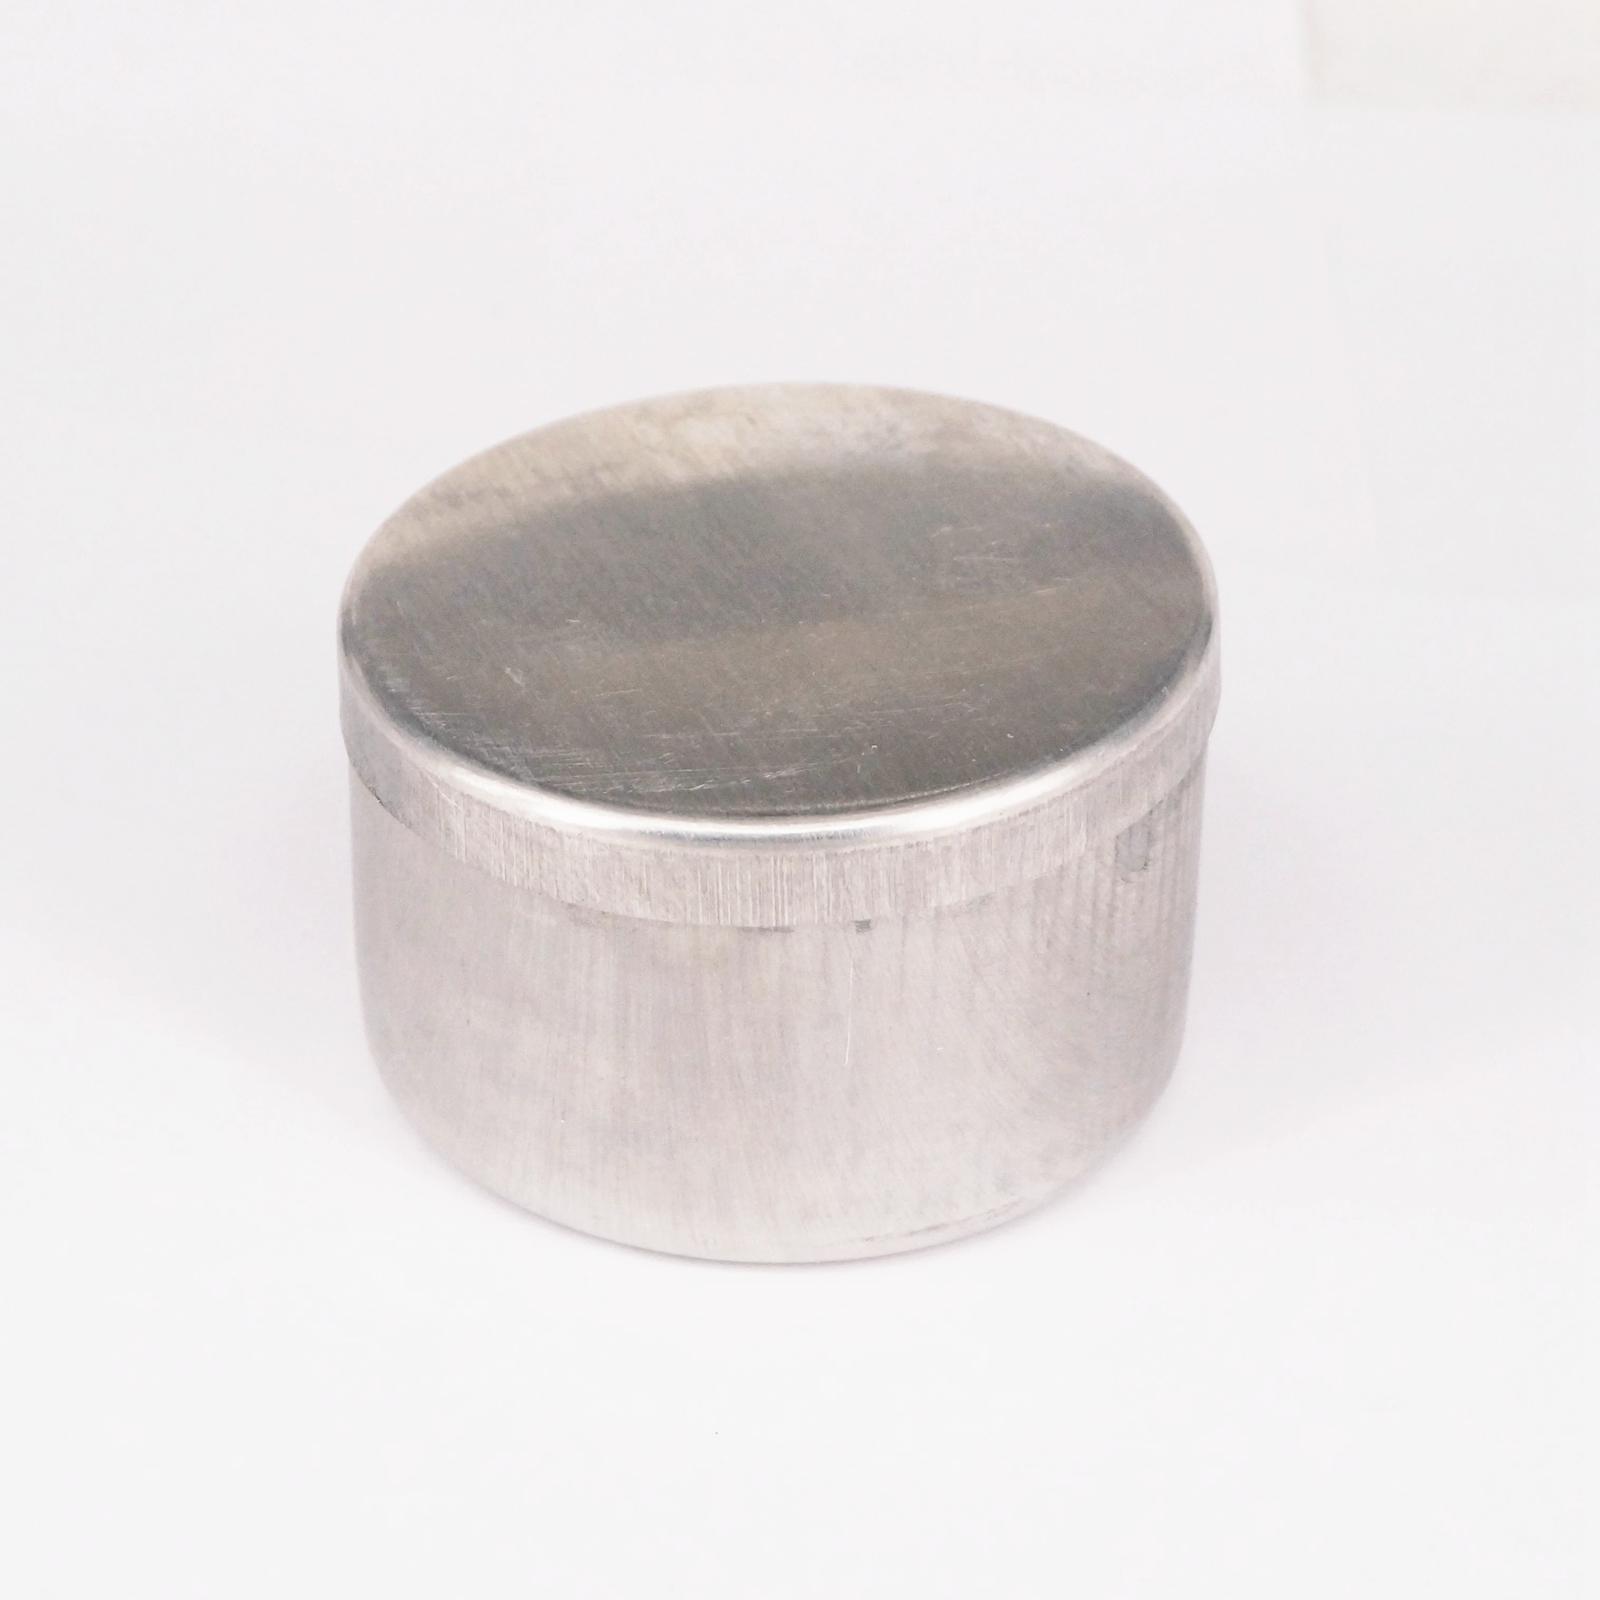 Outer Diameter From 40mm To 100mm Soil Specimen Lab Aluminum Cans For Moisture Measuring Instrument